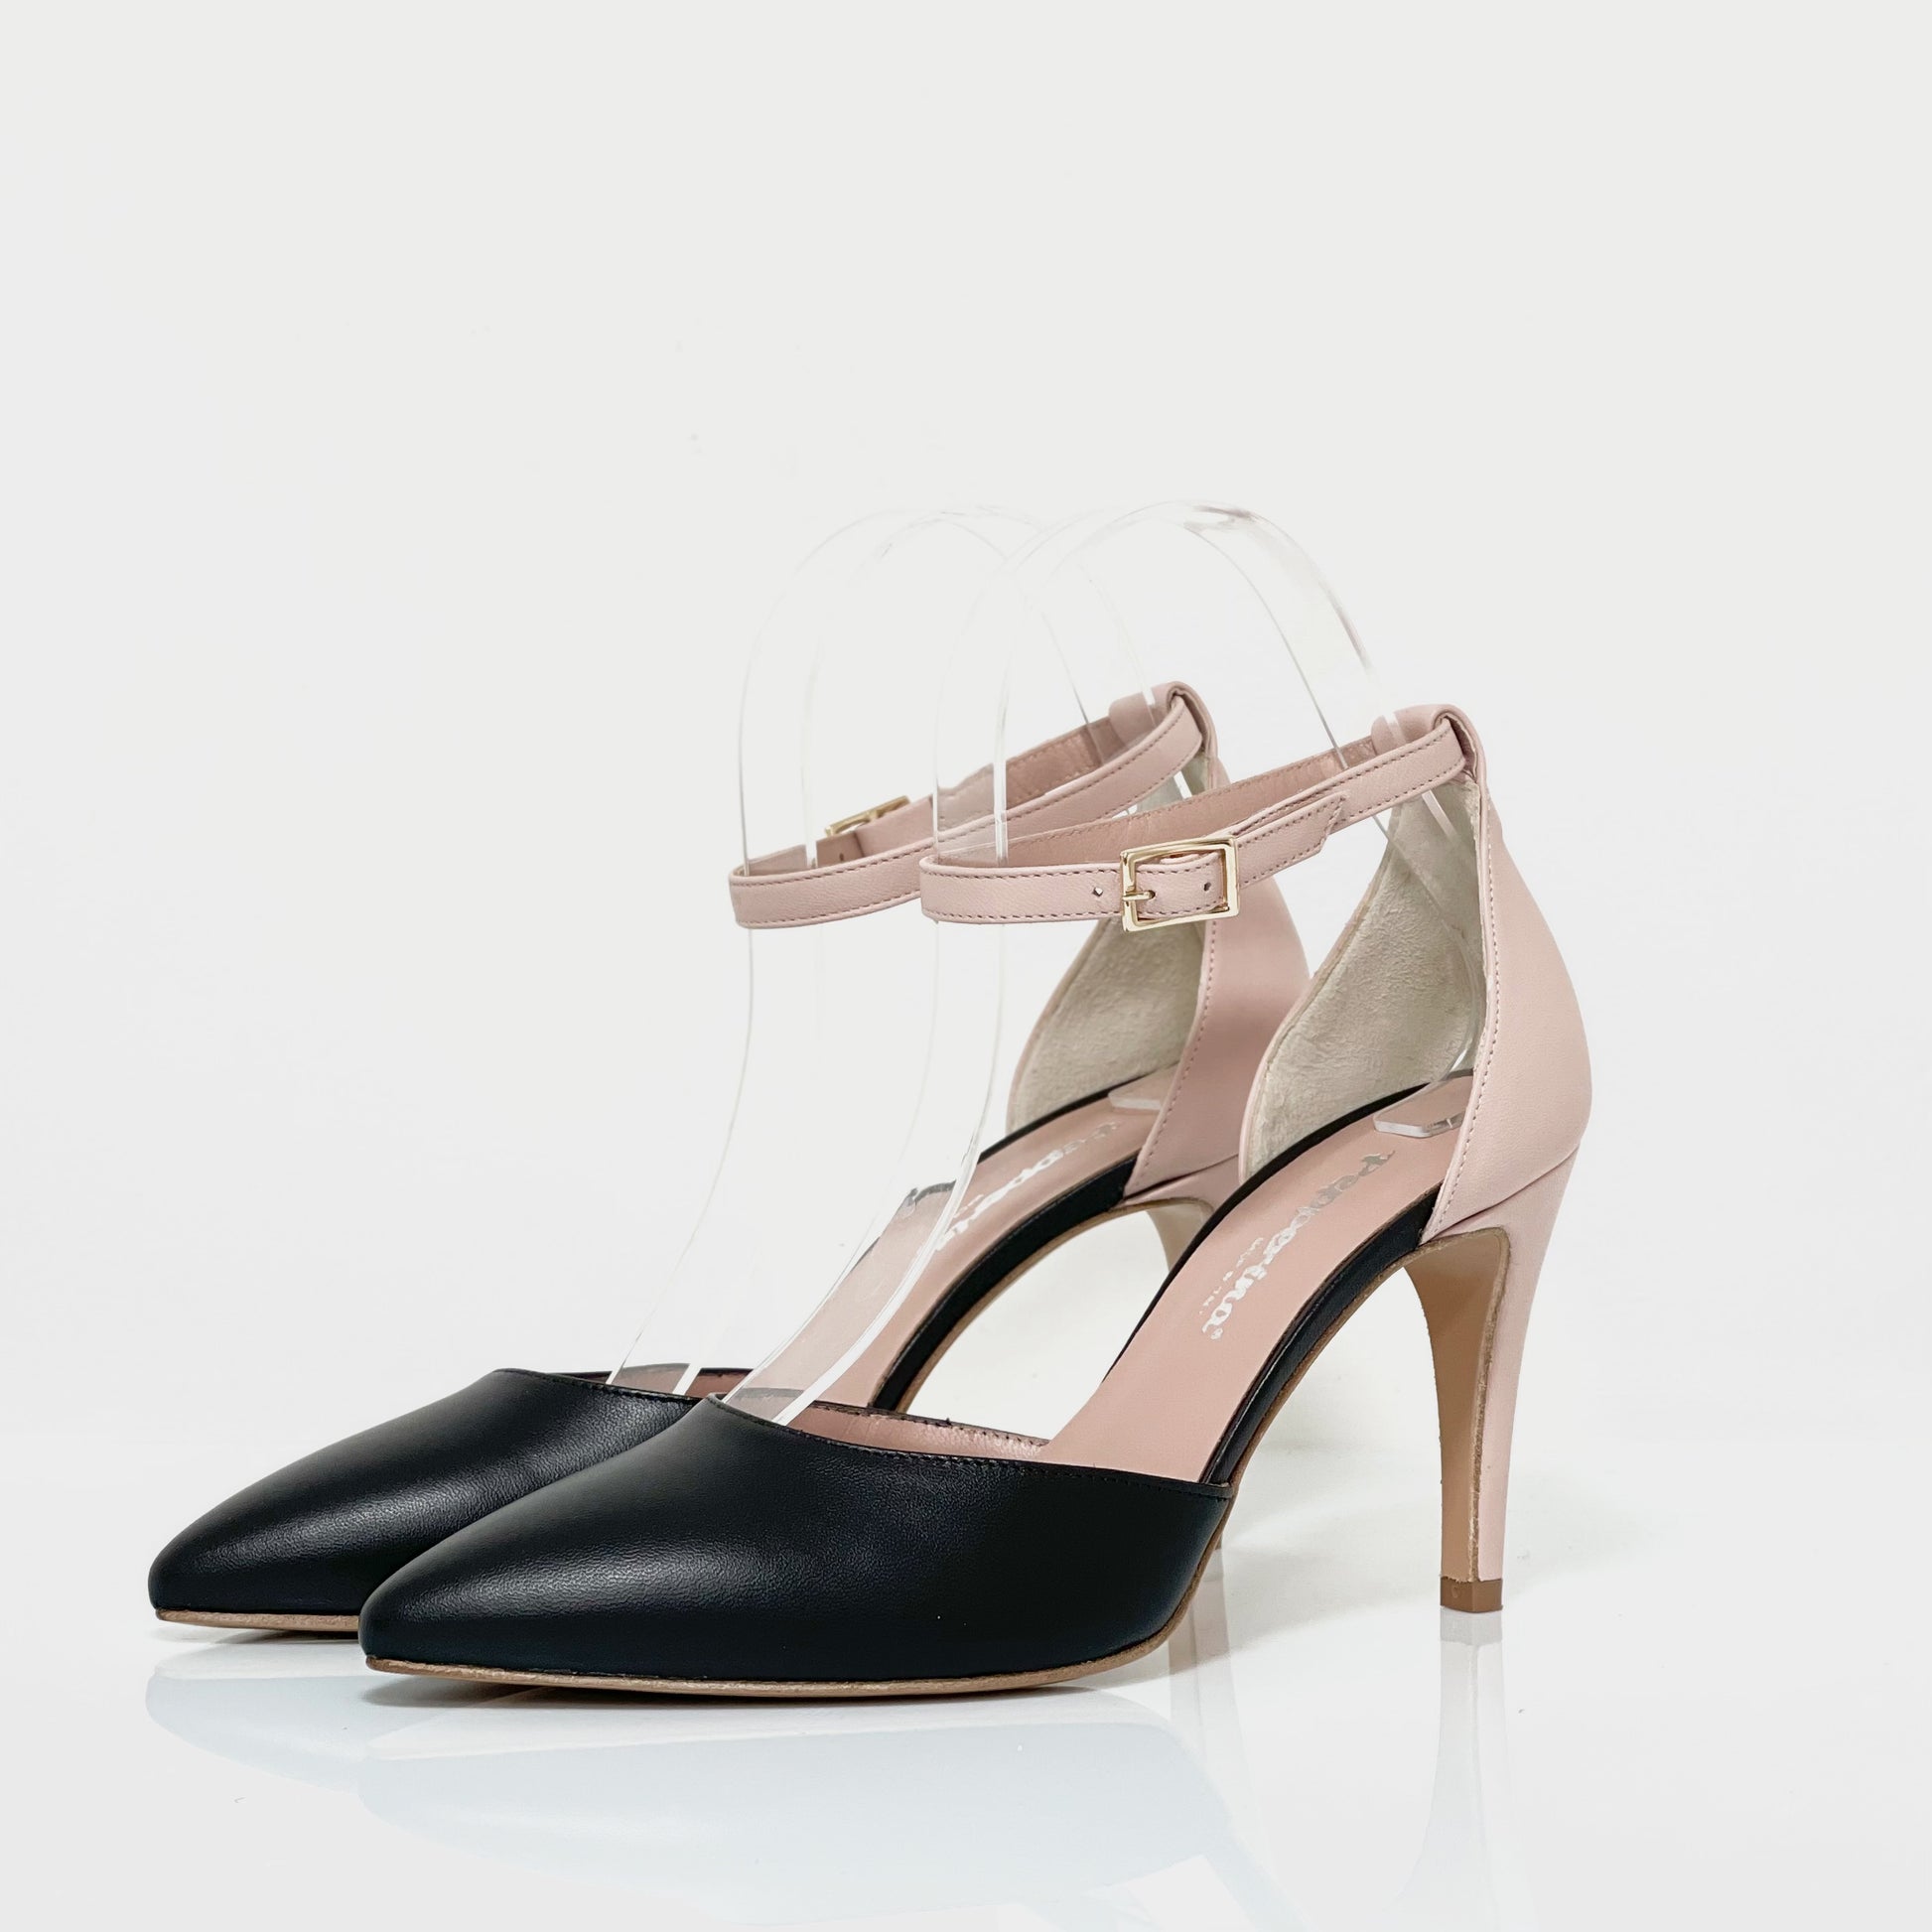 ned At bidrage slack Chanel Woman Shoe With Ankle Strap | Shop Online Pepperina Footwear –  Pepperina Calzature